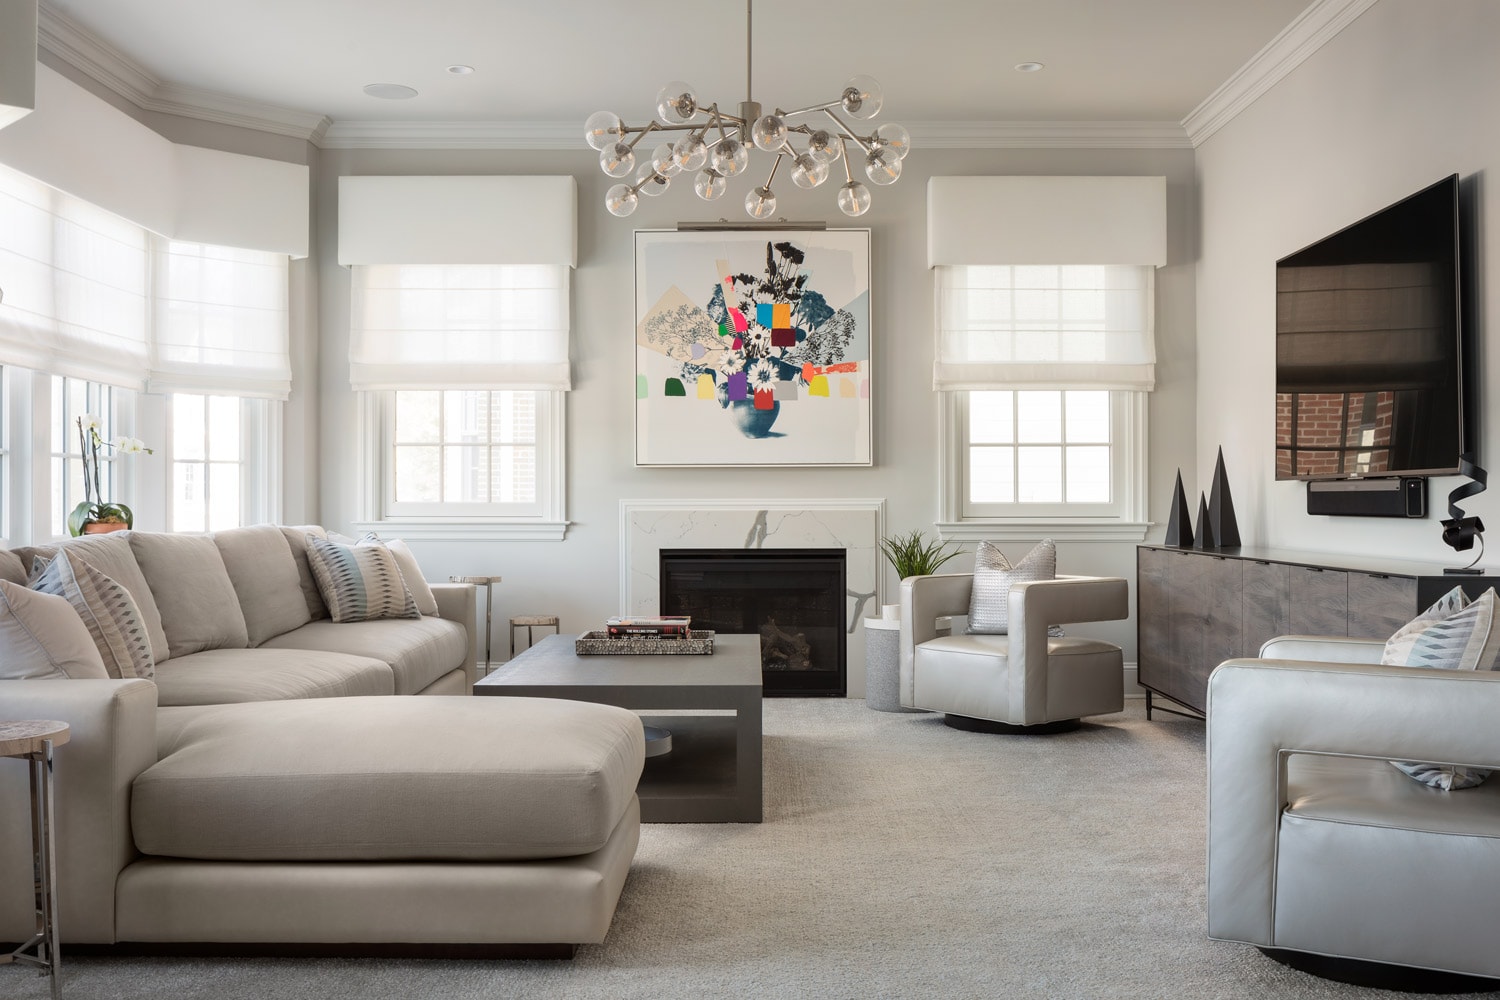 Roslyn village condo living room interiors by Annette Jaffe Interiors